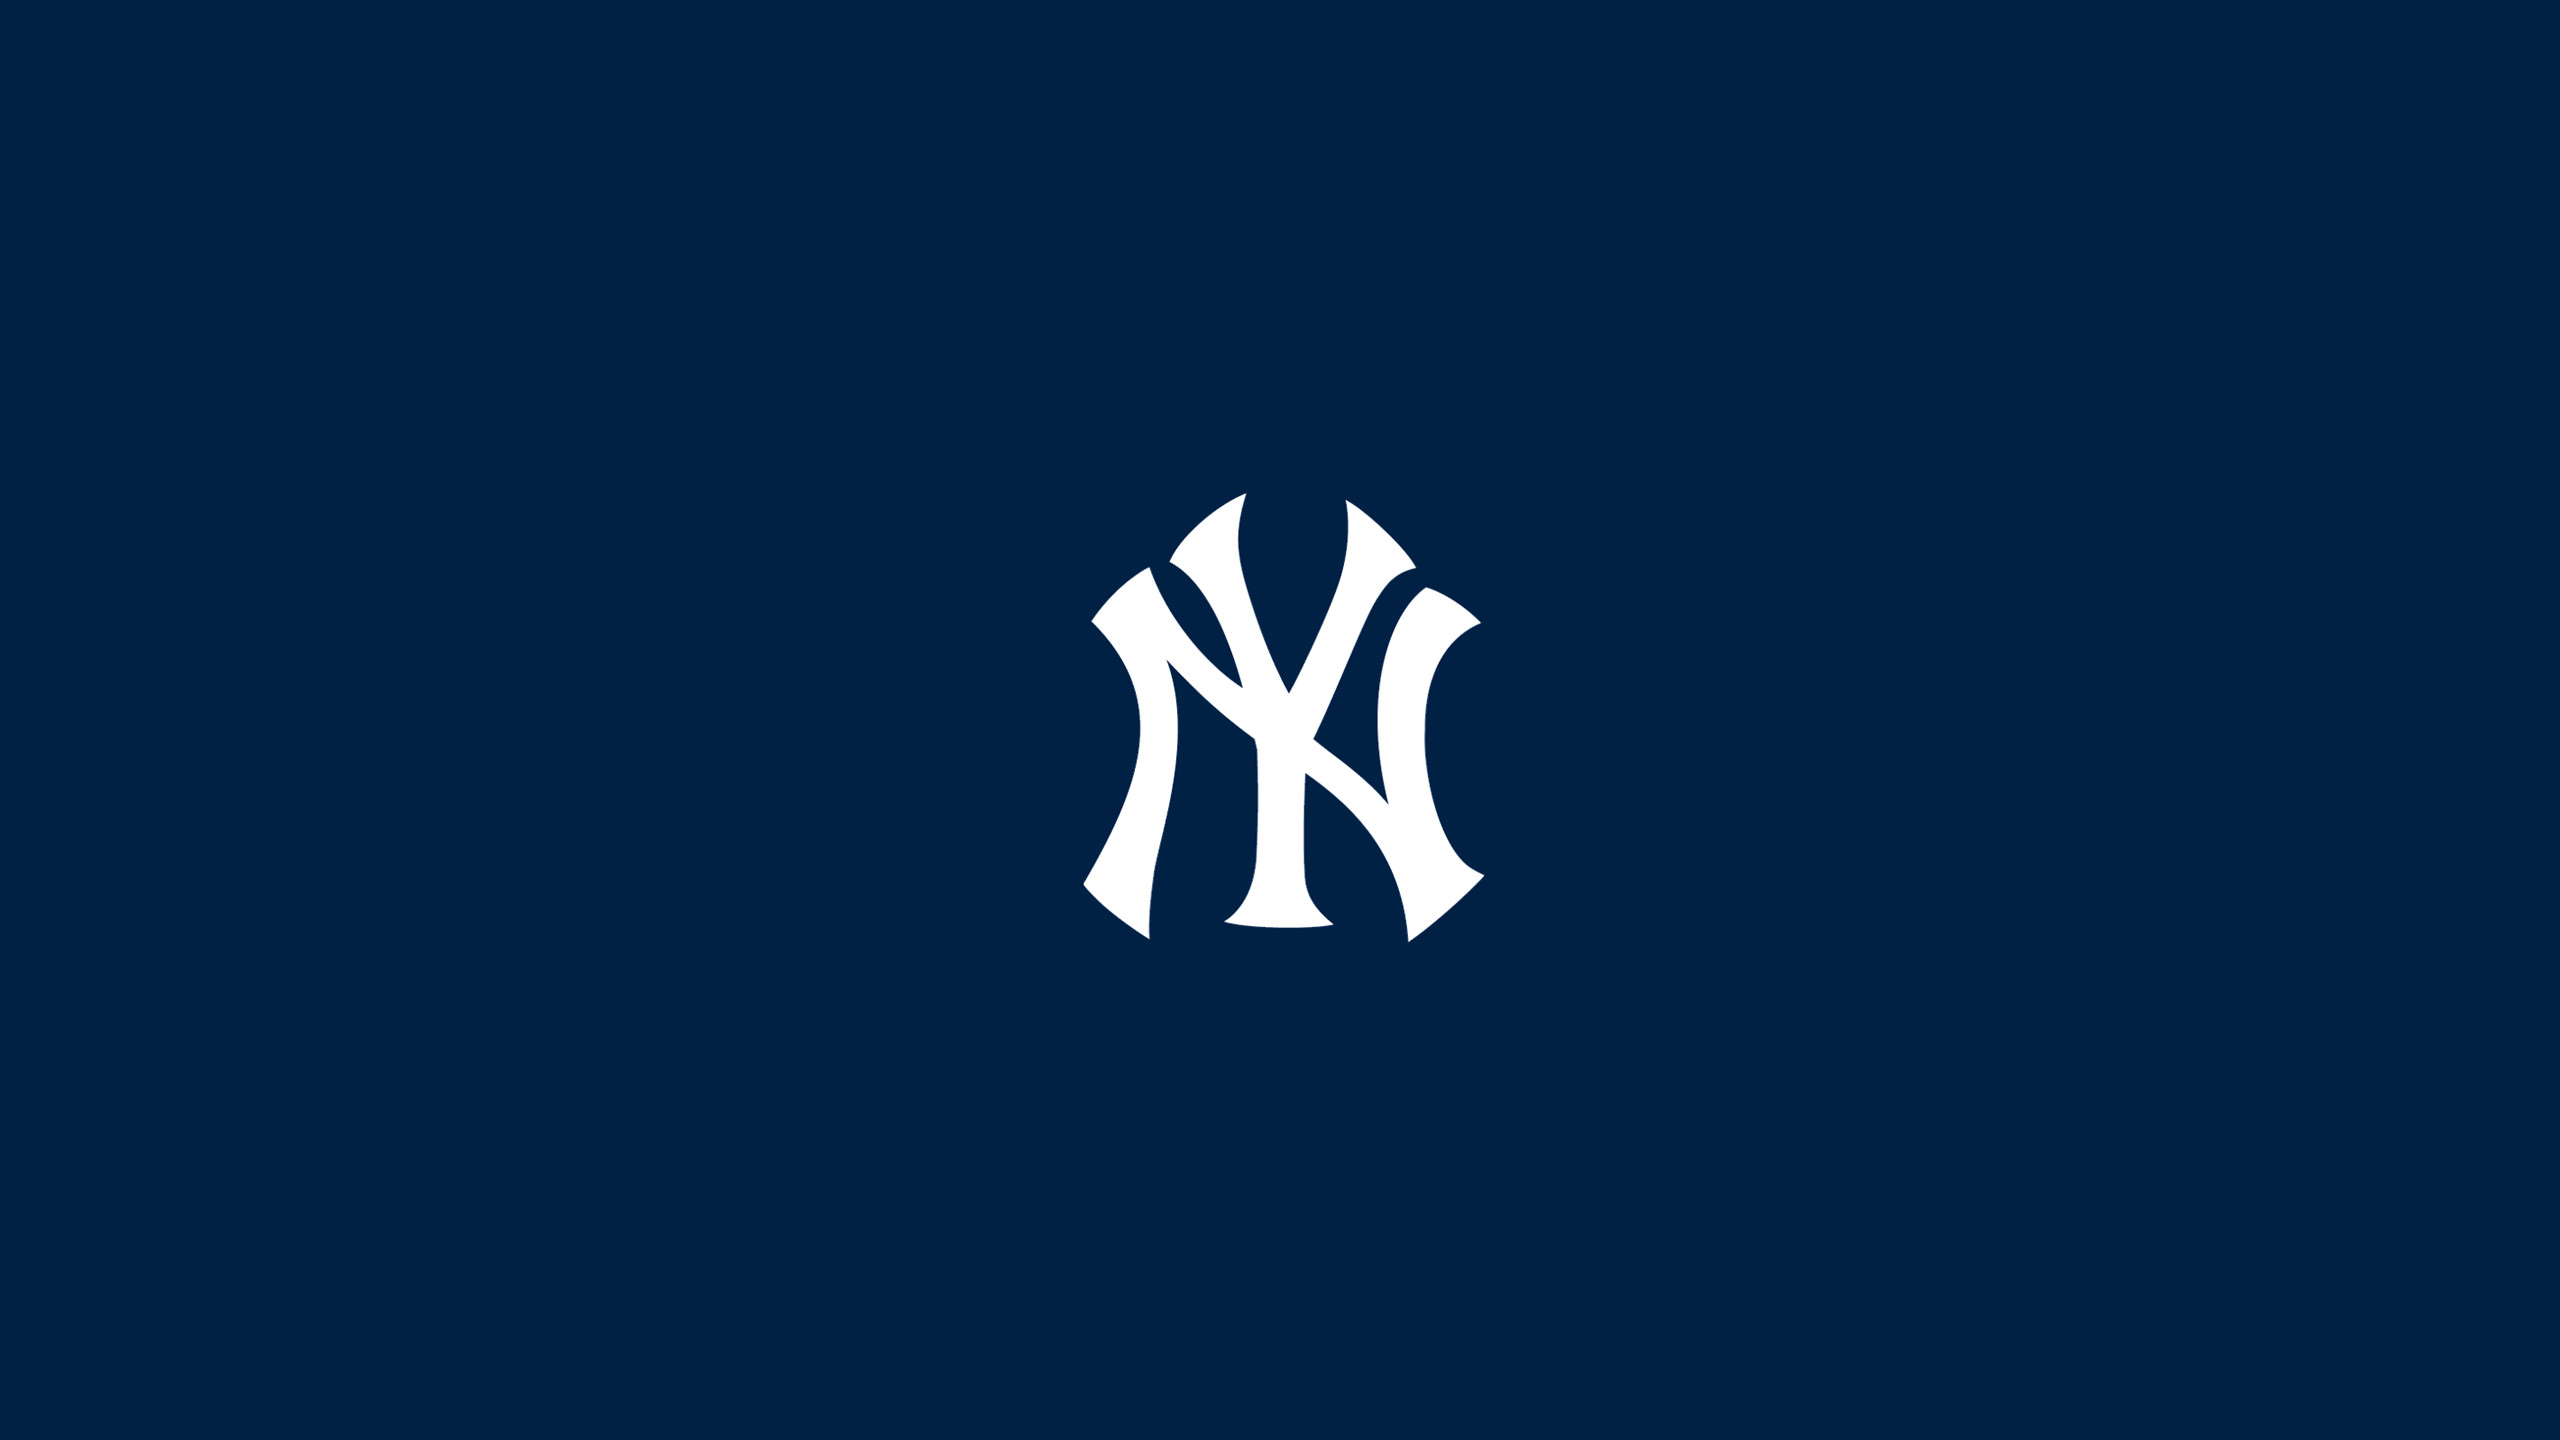 Download Seattle Mariners Wallpaper 4k Free for Android - Seattle Mariners  Wallpaper 4k APK Download - STEPrimo.com